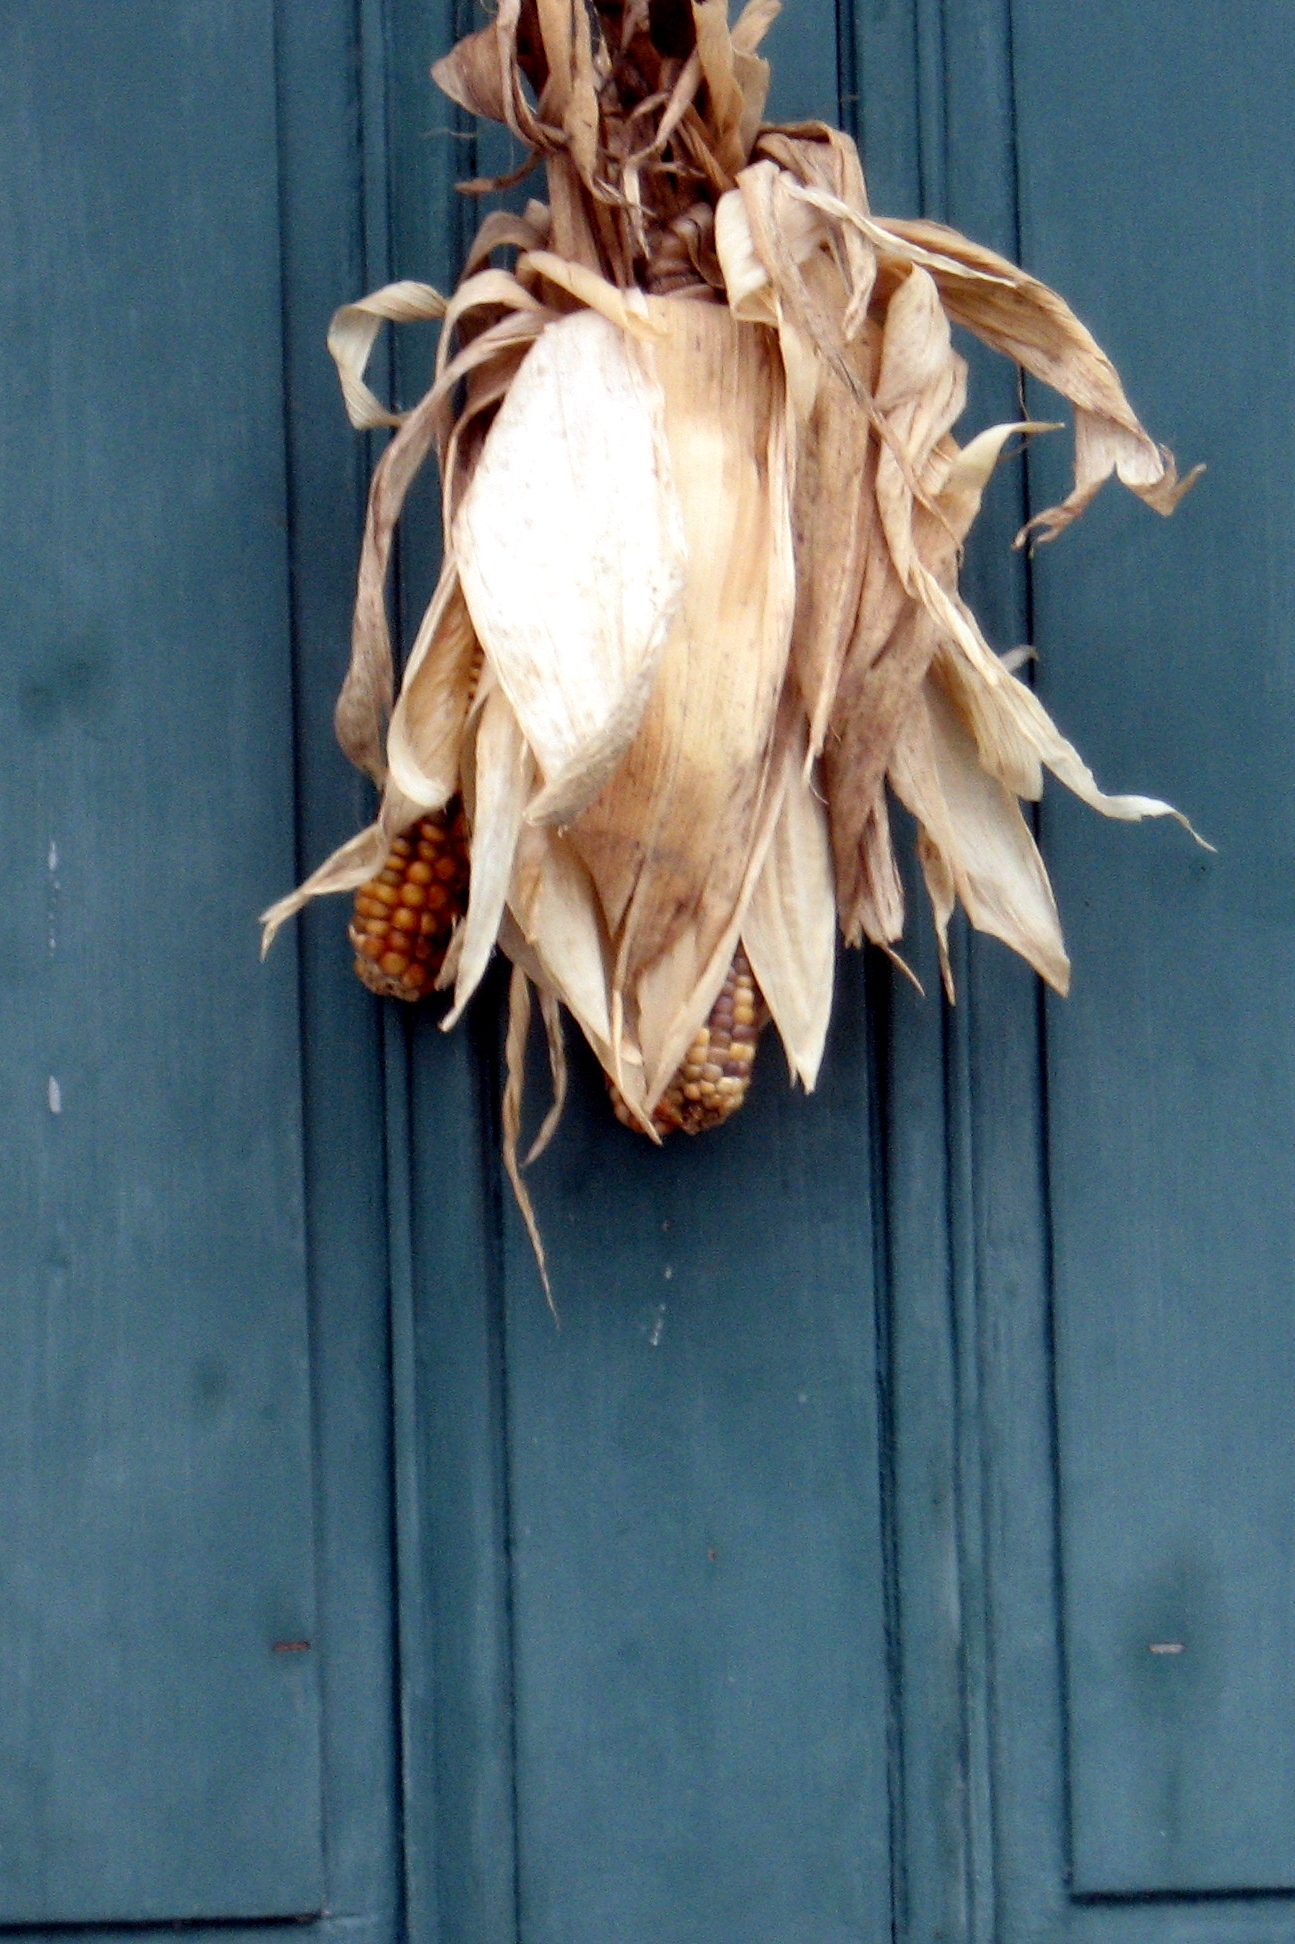 Husked Corn On Door (user submitted)